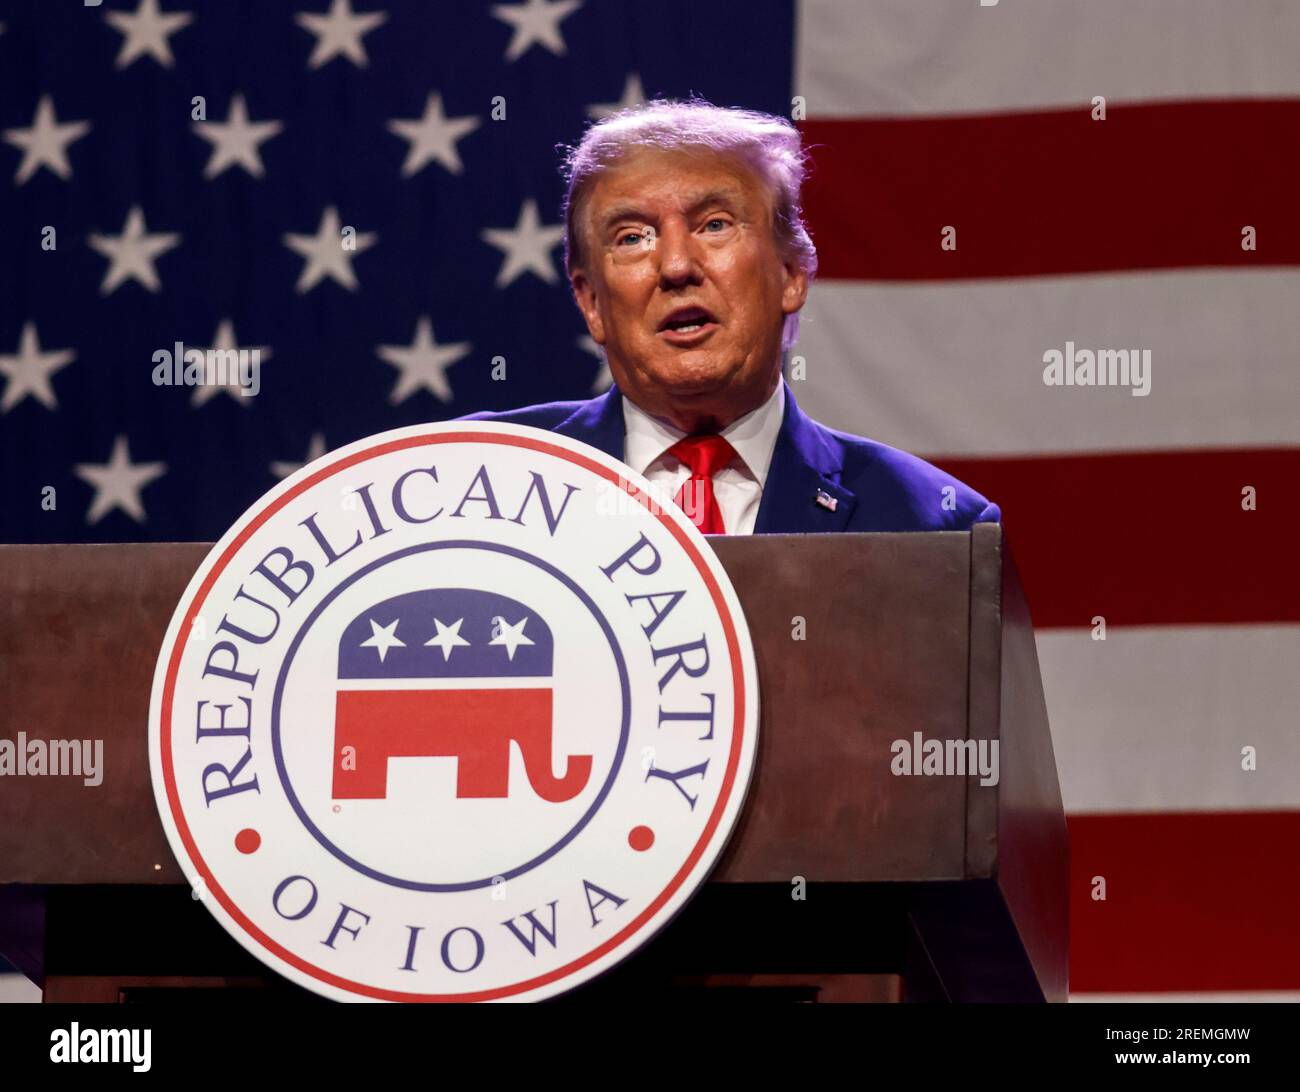 Des Moines, USA. 28th July, 2023. Former US President Donald J. Trump speaks at the 2023 Republican Party of Iowa Lincoln Dinner in Des Moines, Iowa, Friday, July 28 2023. Republican candidates for US President made pitches for their respective candidacies at the gathering in Iowa which will hold the First-in-the-Nation Caucus. Photo by Tannen Maury/UPI Credit: UPI/Alamy Live News Stock Photo